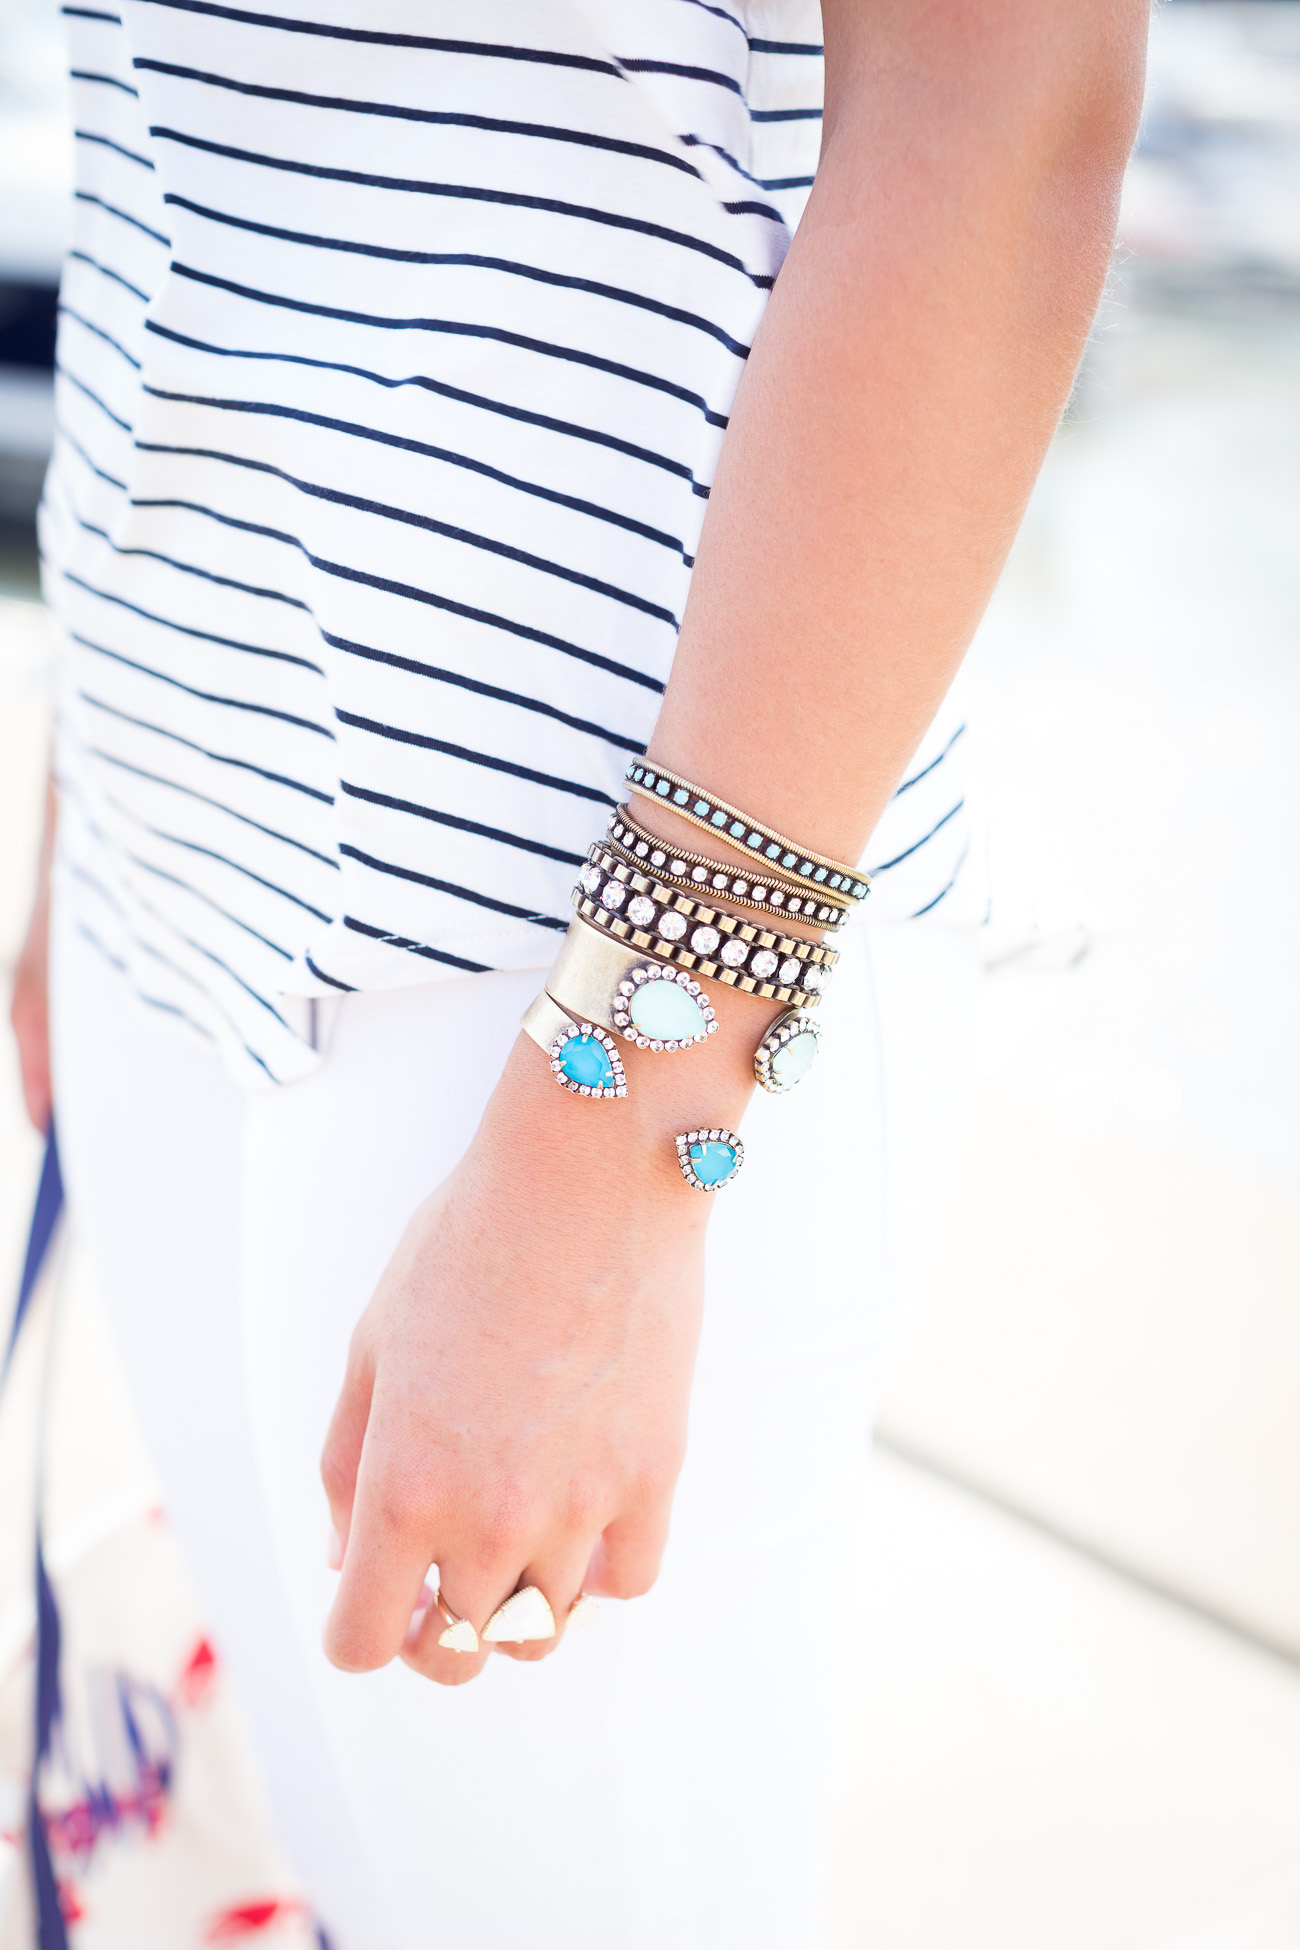 Loren Hope Jewelry & Arm Party // A Southern Drawl